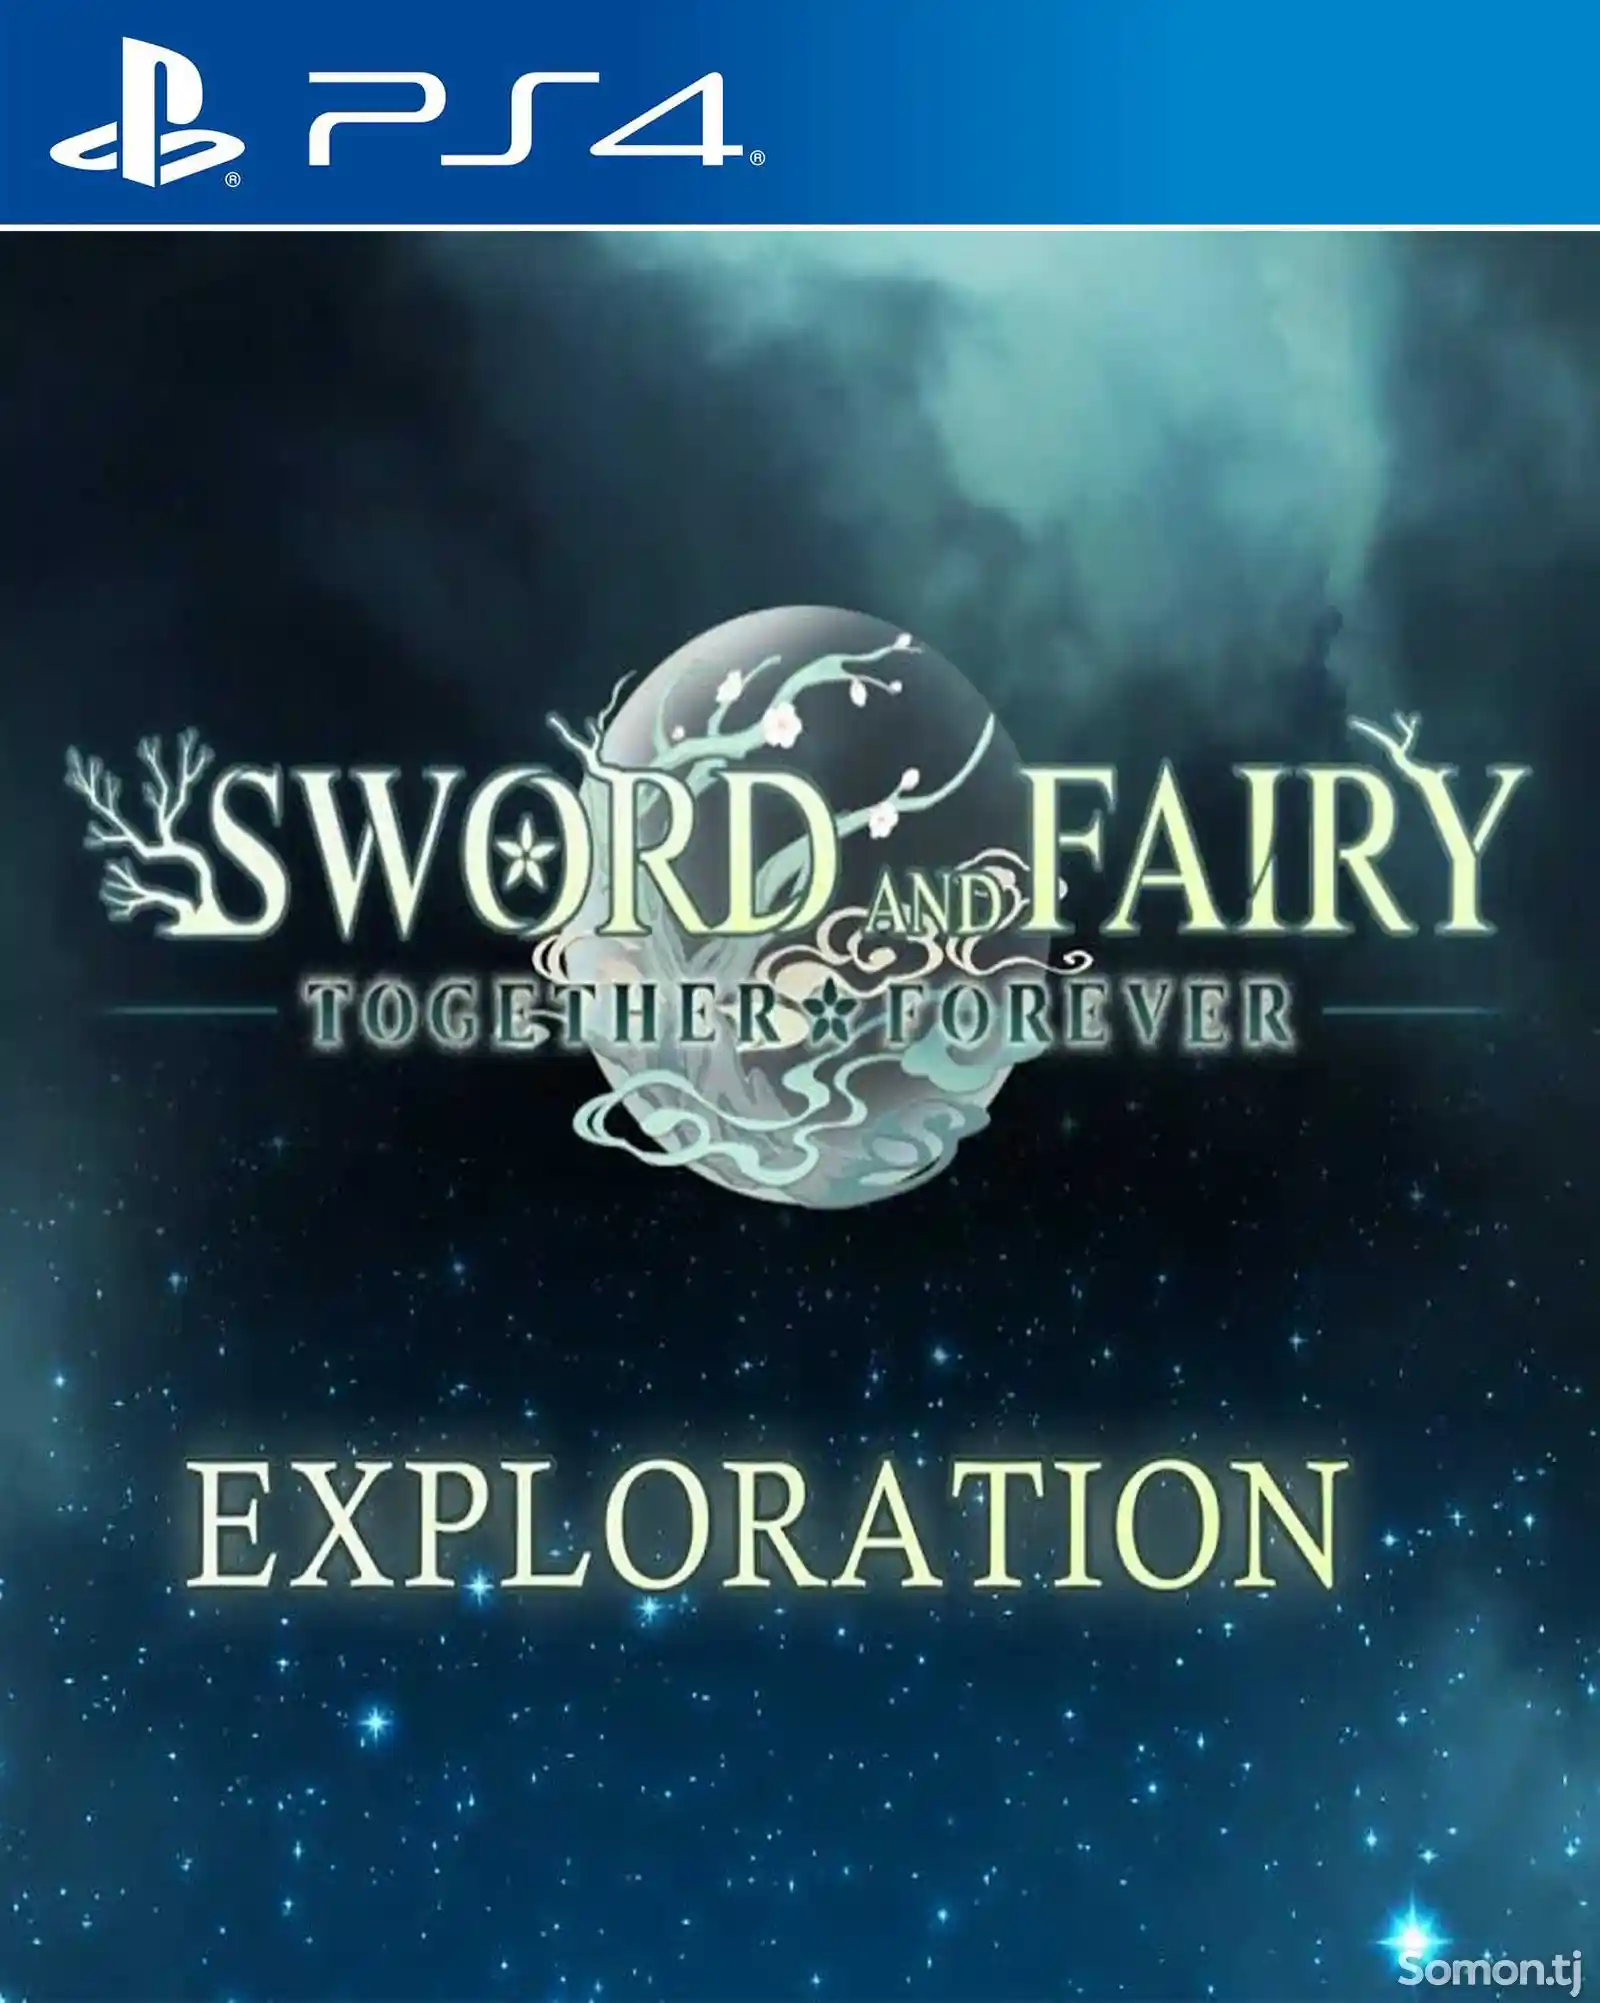 Игра Sword and fairy together forever для PS-4 / 5.05 / 6.72 / 7.02 / 9.00 /-1